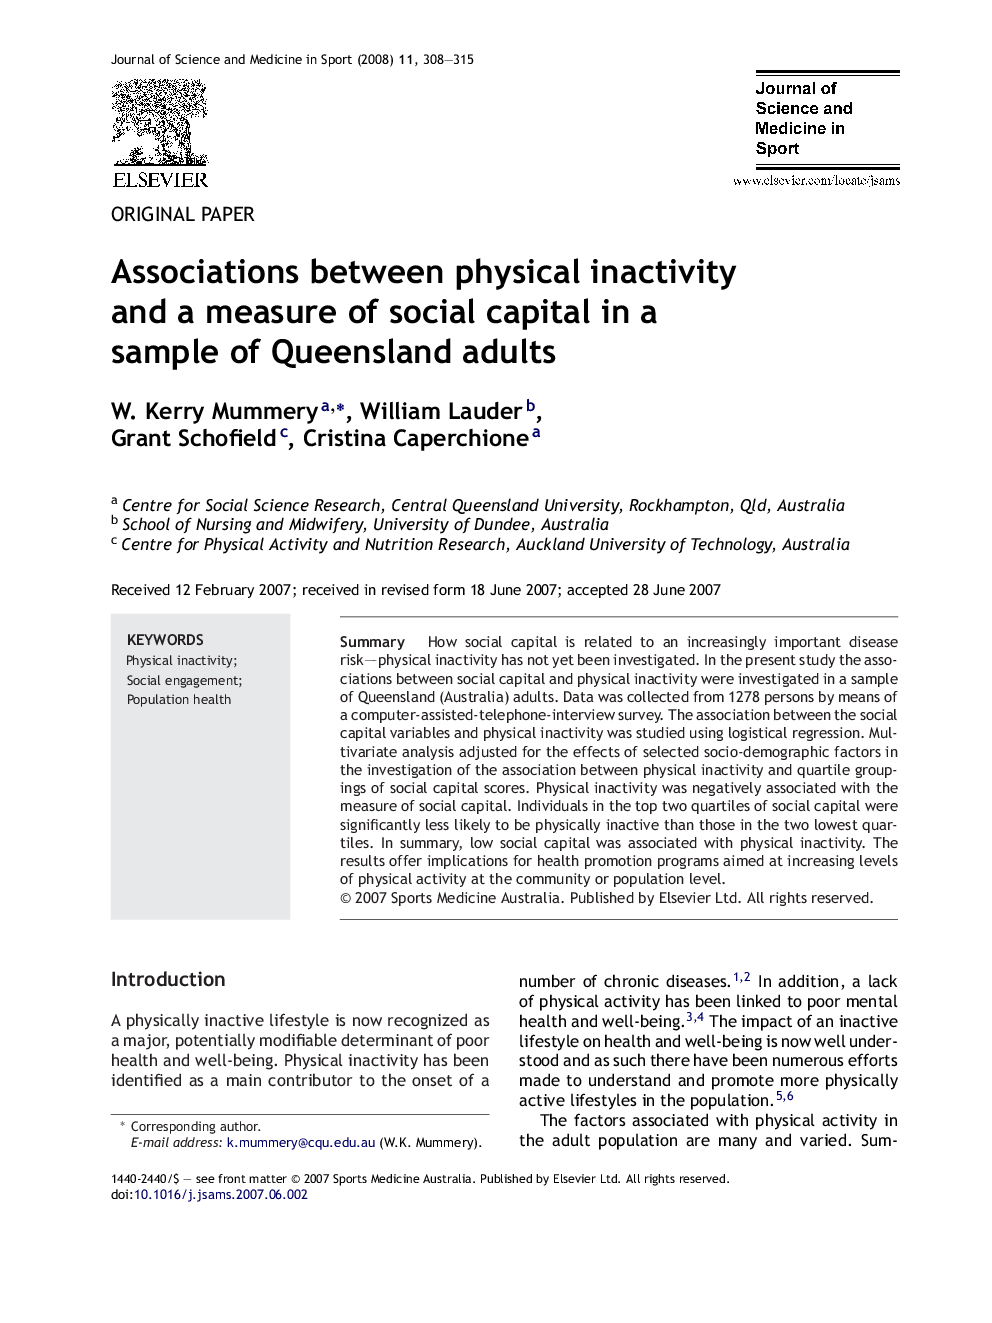 Associations between physical inactivity and a measure of social capital in a sample of Queensland adults